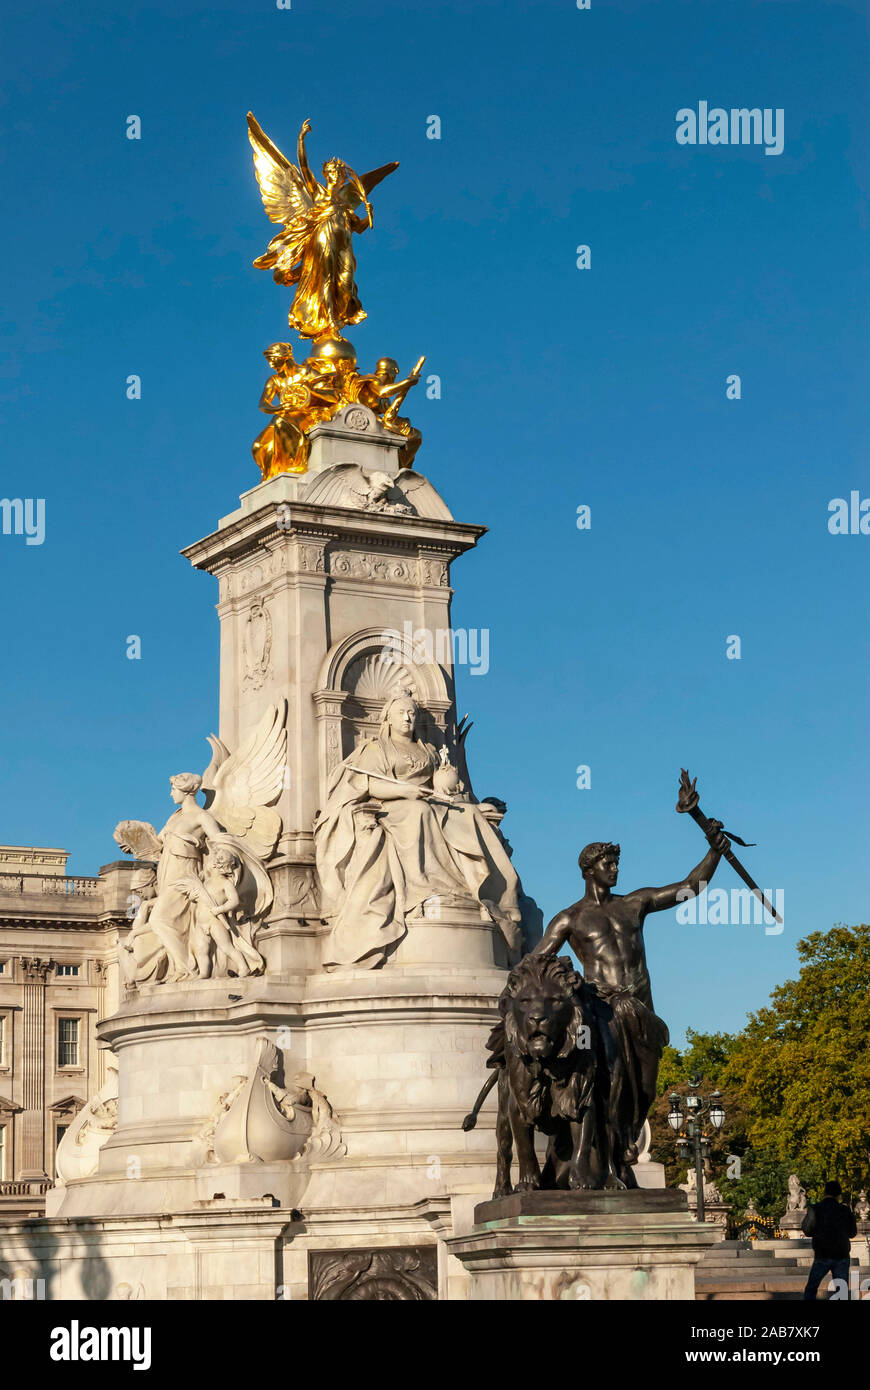 Queen Victoria Monument, Buckingham Palace, The Mall, London, England, United Kingdom, Europe Stock Photo